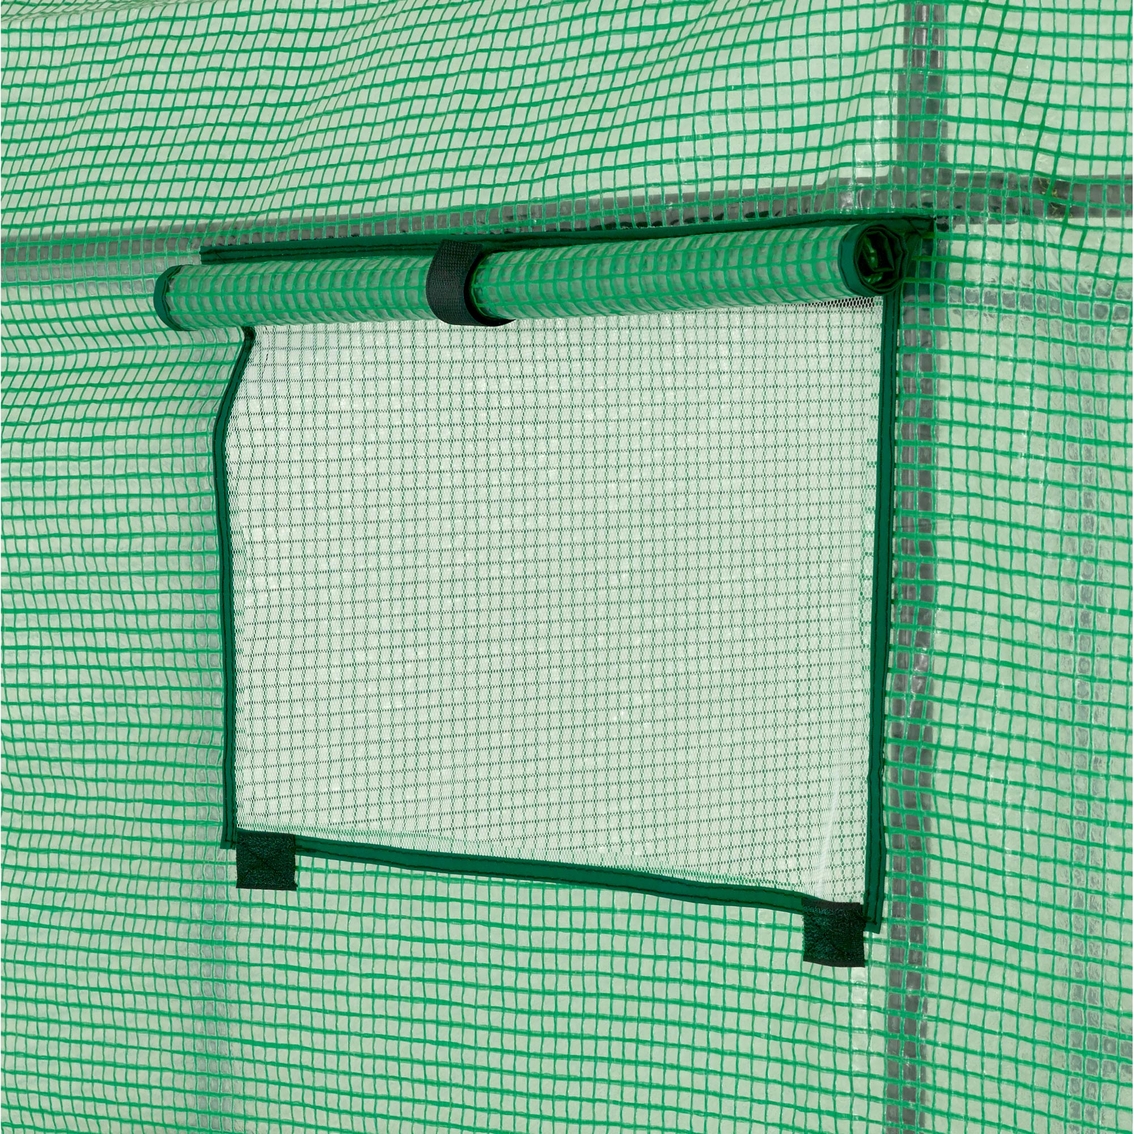 Ogrow 2 Tier 8 Shelf Greenhouse PE Replacement Cover - Image 4 of 5